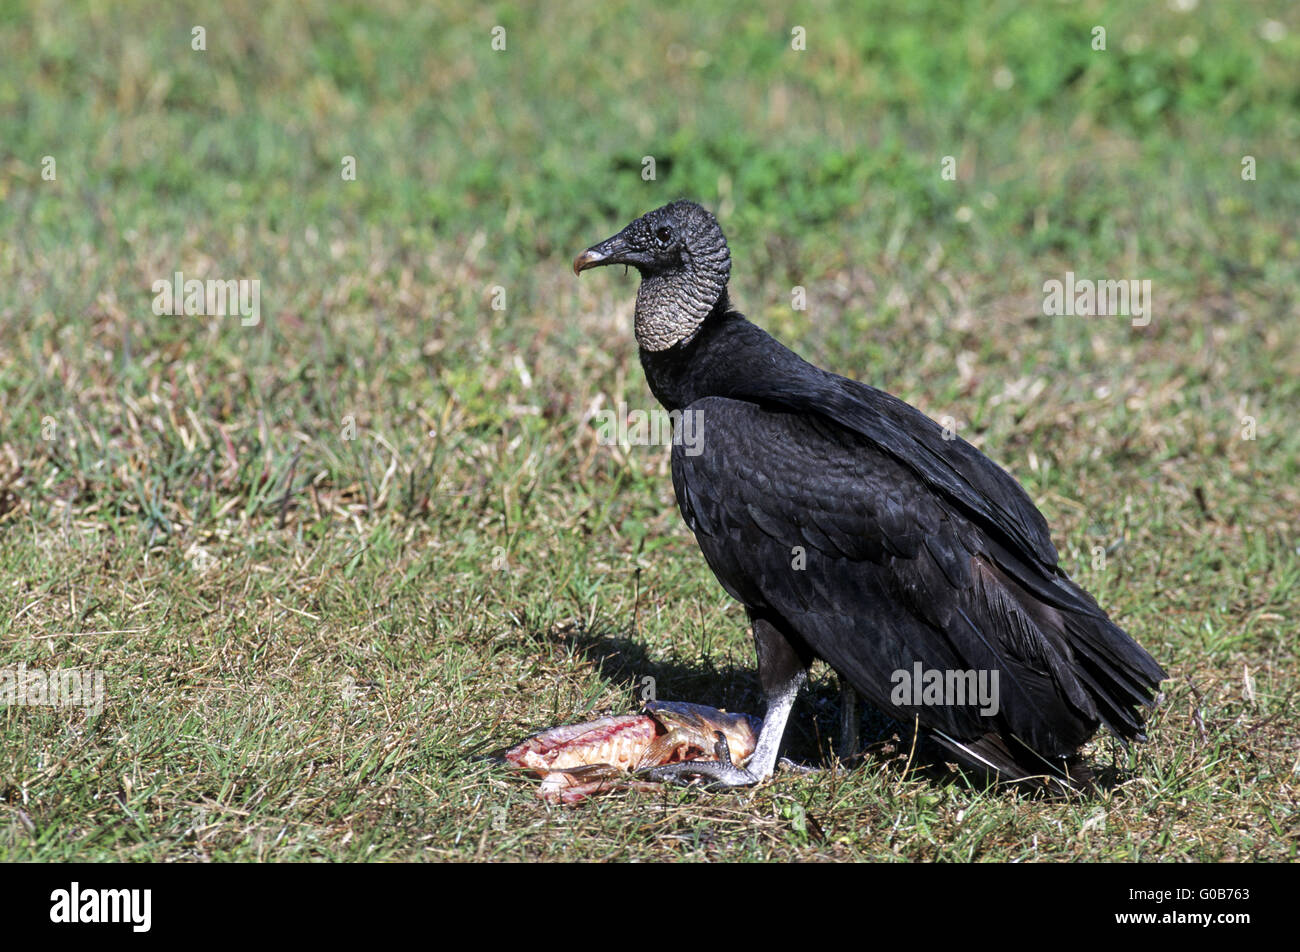 Black Vulture at the remains of a fish Stock Photo